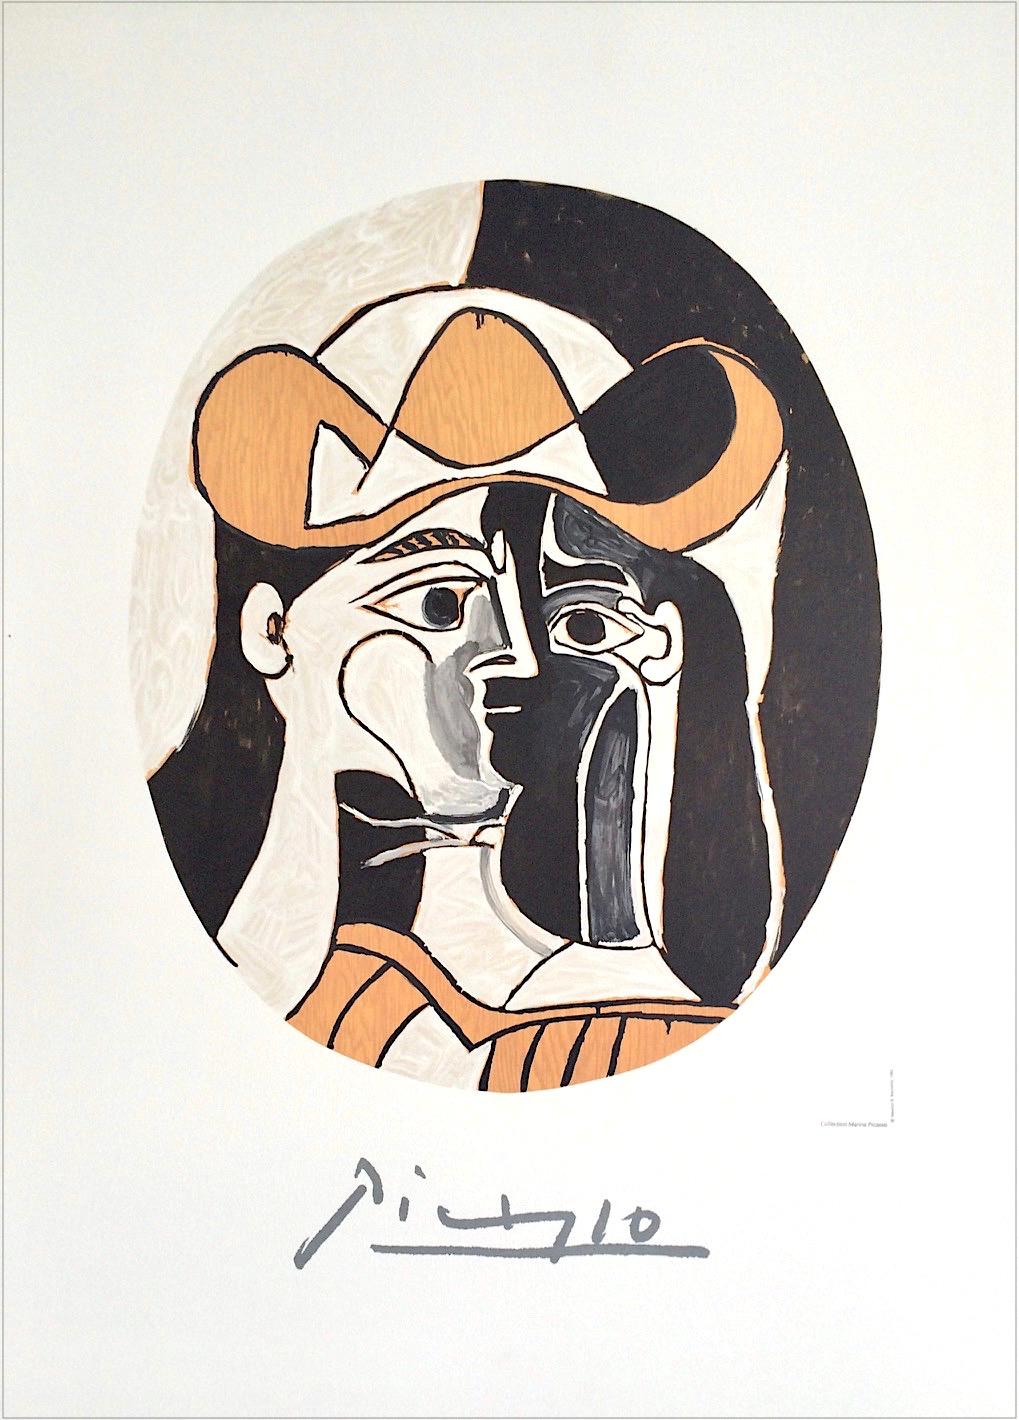 Artist: Pablo Picasso, After, Spanish (1881 - 1973)
Title: Femme au Chapeau, #J-25
Year of Original Artwork: 1961
Medium: Lithograph on Coventry Paper, 100% acid free
Edition of 1000, unnumbered, estate approved printed signature
Print Size: 29.25 x